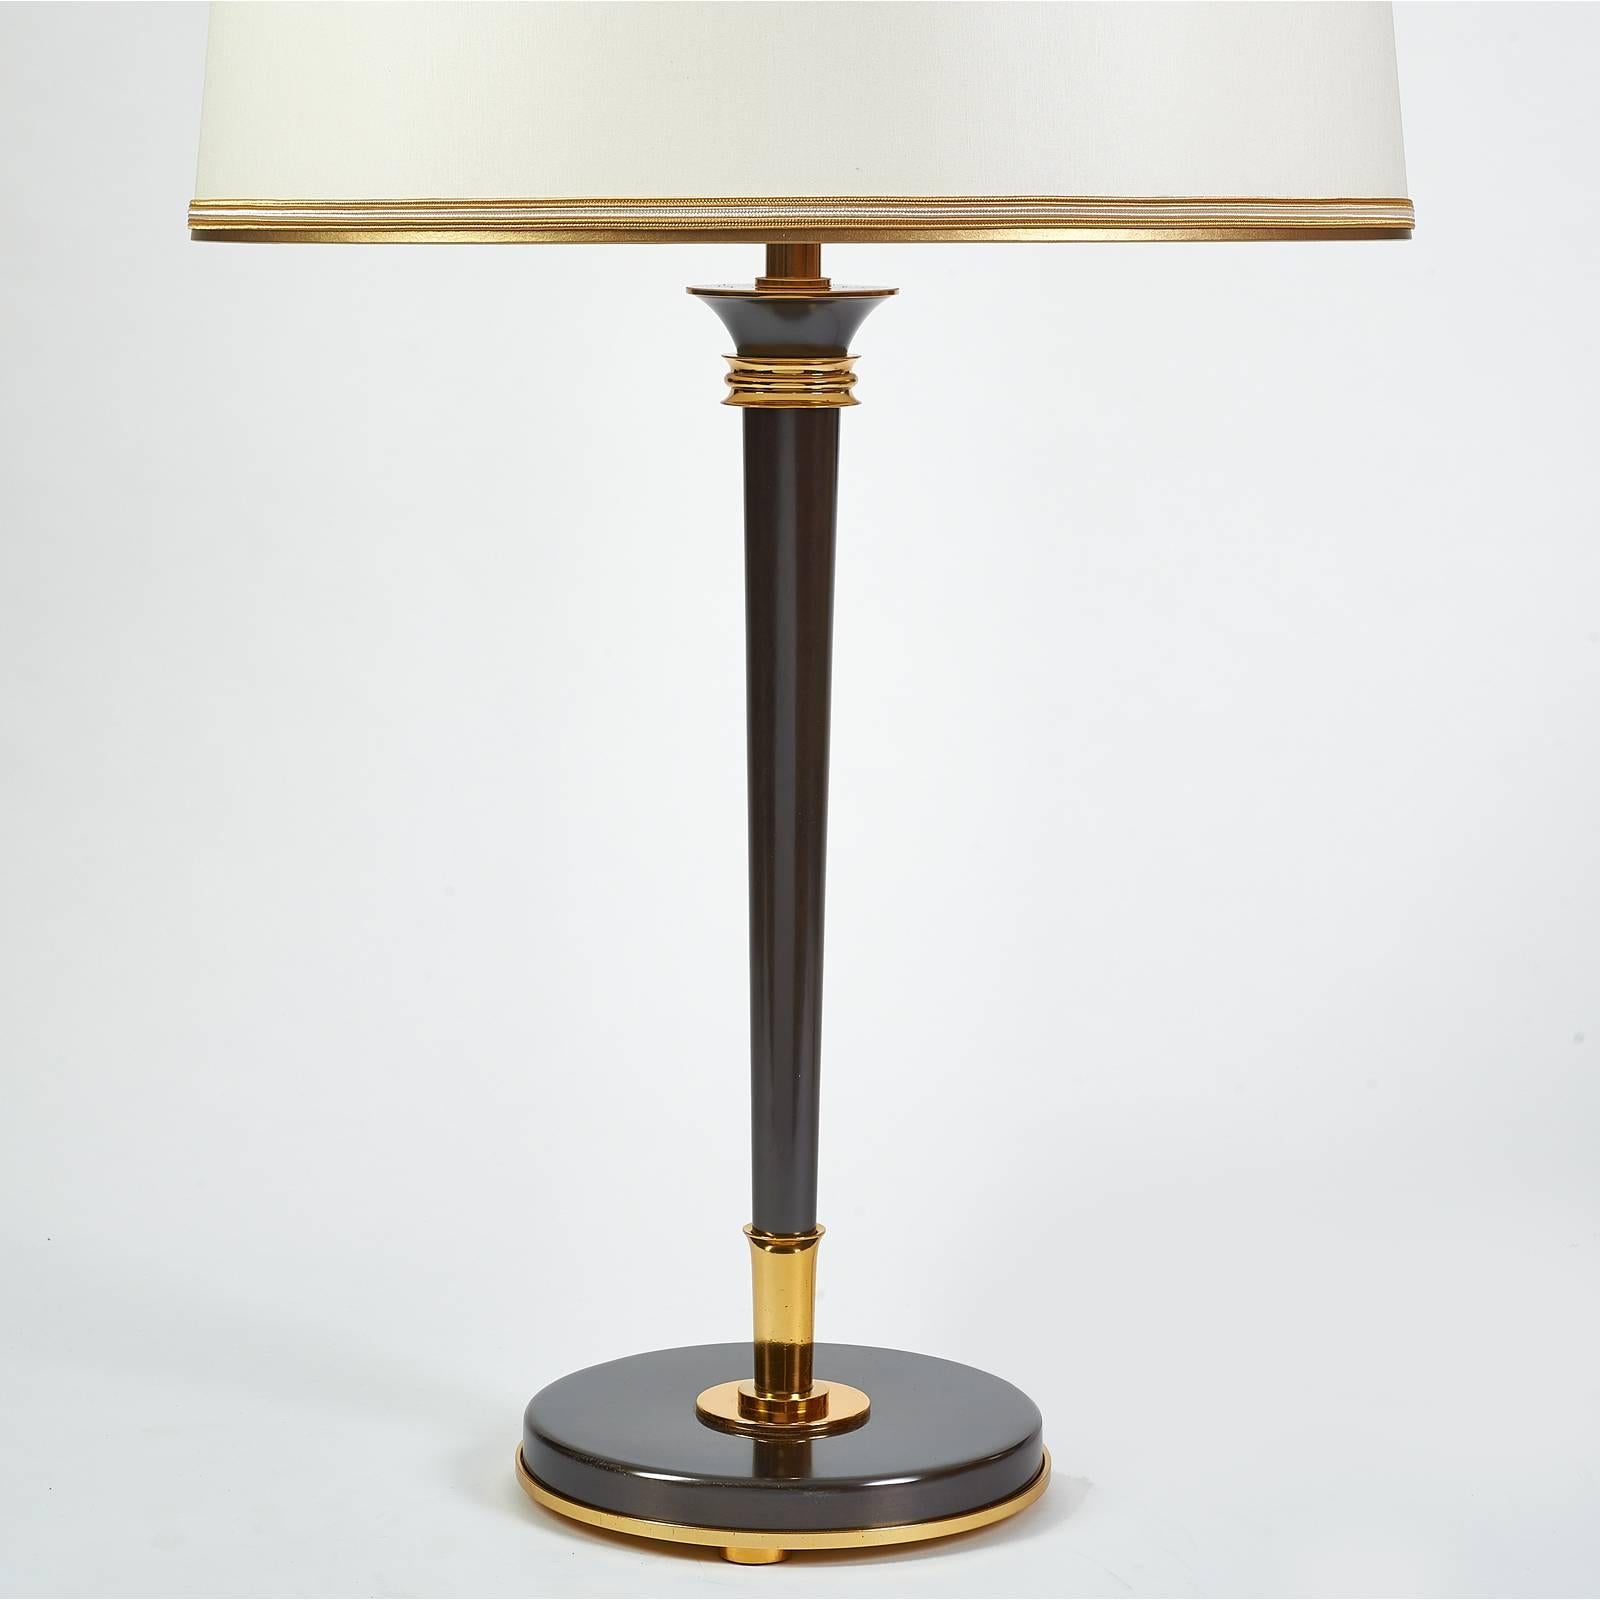 Genet Michon attributed,
Important and tall modernist desk lamp
Contrasting oxidized and polished bronze with handsome tailored mounts, France, 1950s.
Dimensions: 33 H x 16 diameter.
Rewired for use in the USA with two standard base bulbs.

